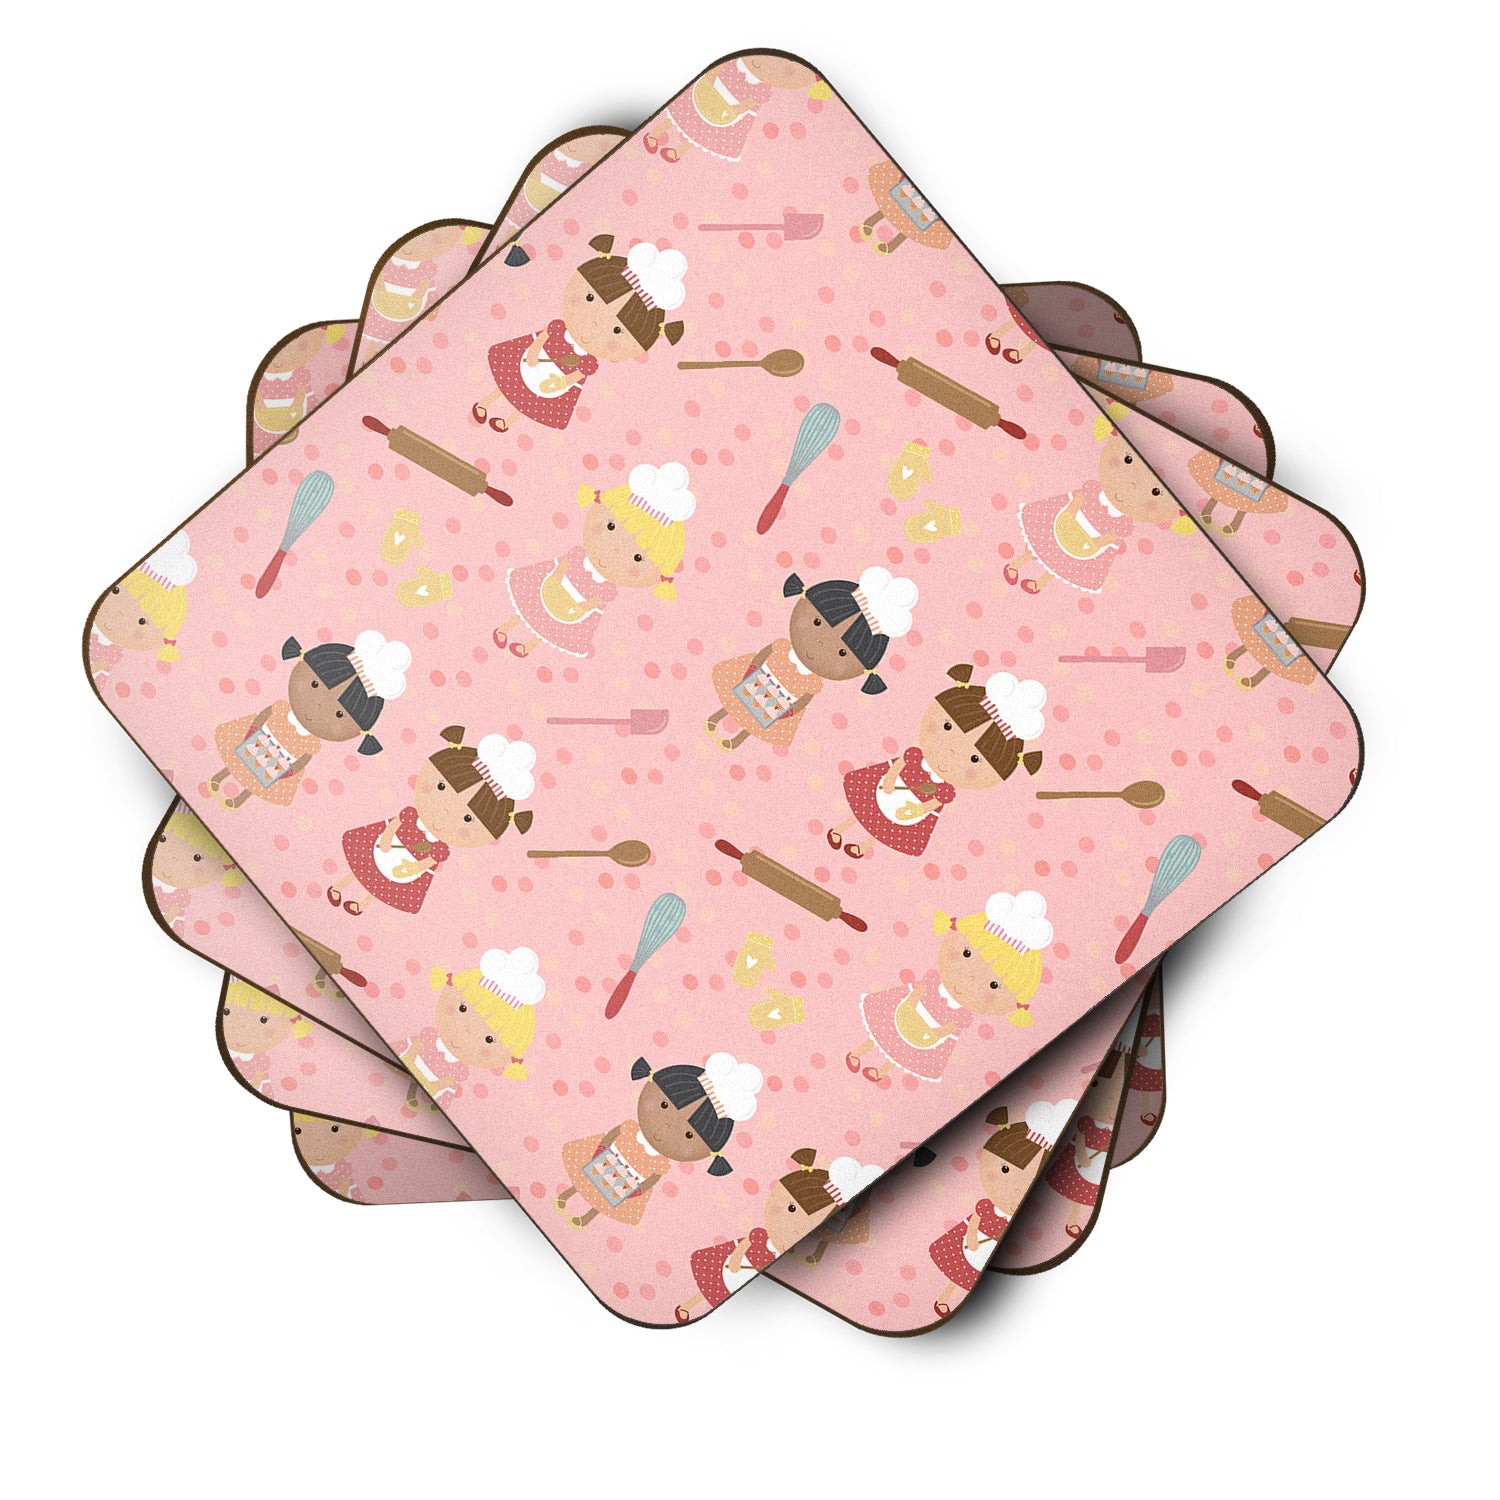 Bakers Delight on Pink Foam Coaster Set of 4 BB7312FC - the-store.com